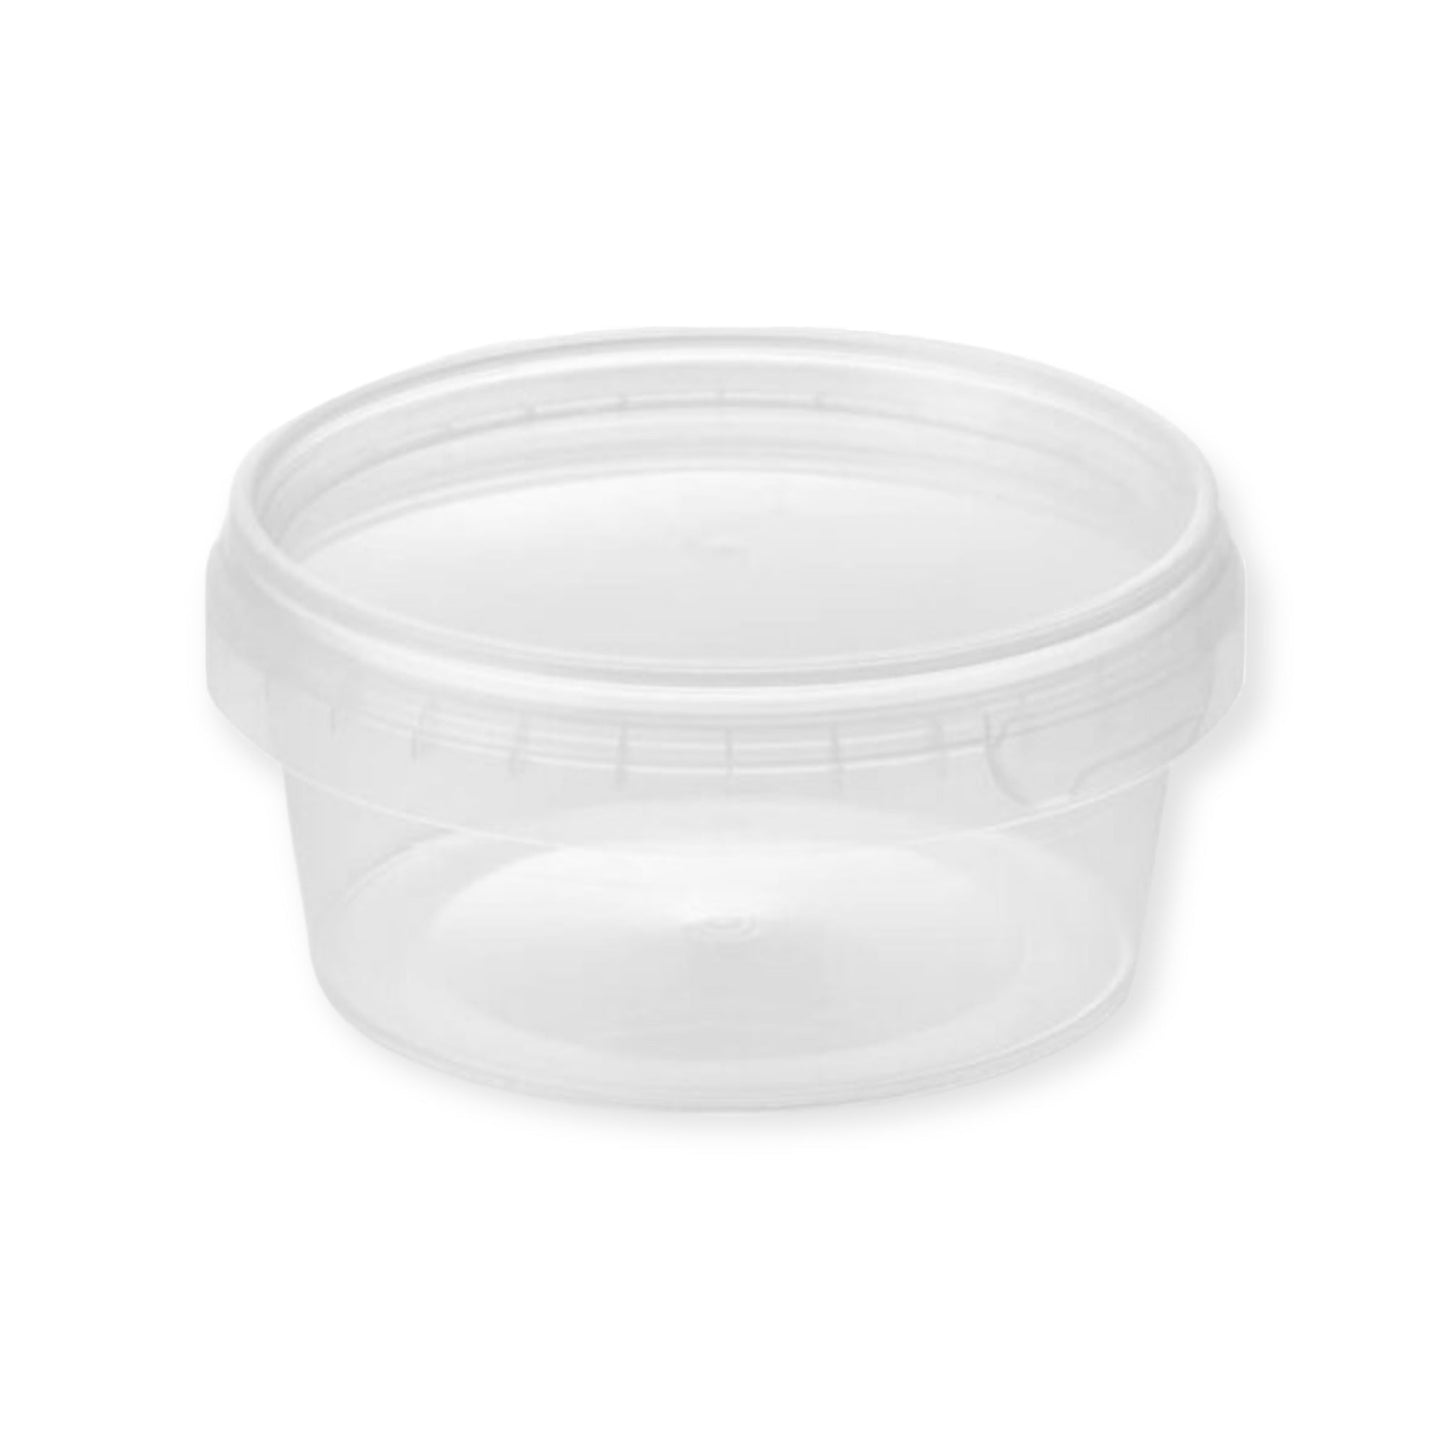 180ml Tamper-Proof Clear Round Containers & Lids